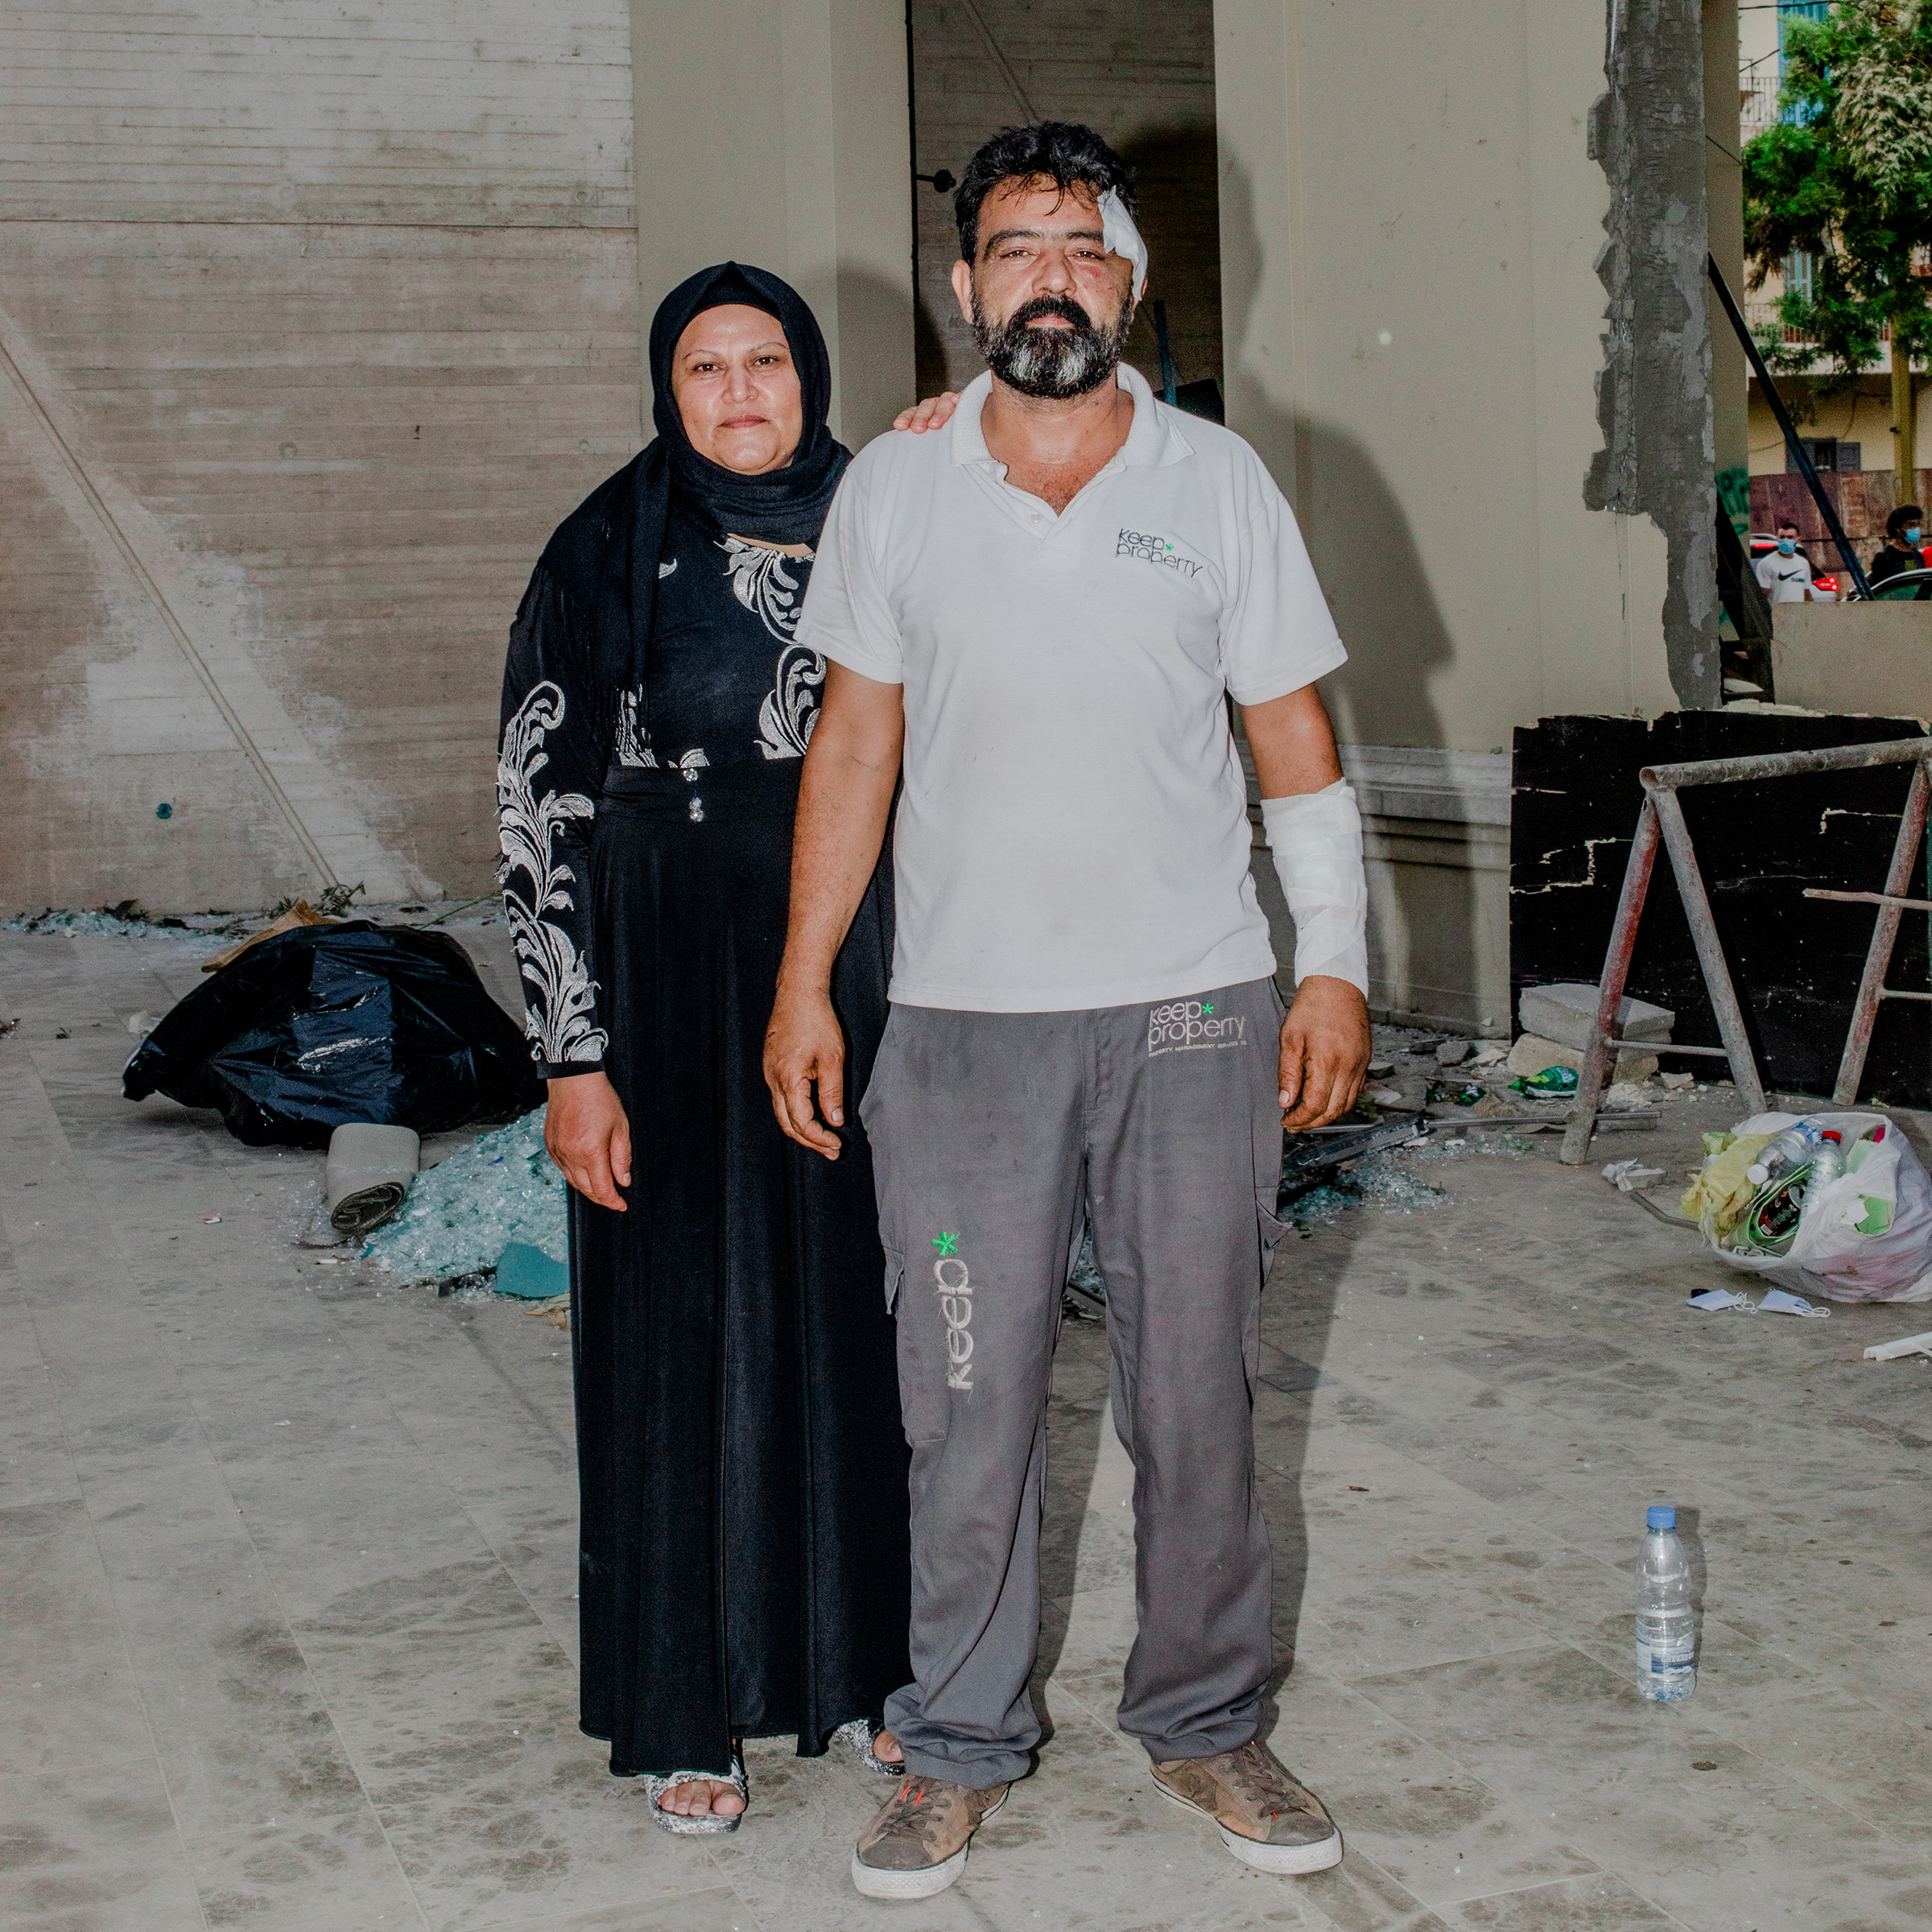 Riad Hussein Al Hussein and his wife Fatima Al Abid in the Mar Mikhael neighborhood of Beirut on Aug. 7. He was buying vegetables there three days earlier when he heard a small explosion. He asked the seller whether he thought it was a shell or a bomb, and where it had landed. "Our discussion lasted approximately one minute and was interrupted by another sound of explosion, one way louder,” he recalls. “I shouted and said we needed to hurry inside the shop, and that is when I was hit by the glass." He later went back to the building where he was injured to assist with cleaning up. "I wanted to help like I had been helped," he said. "I wanted to pay it forward."